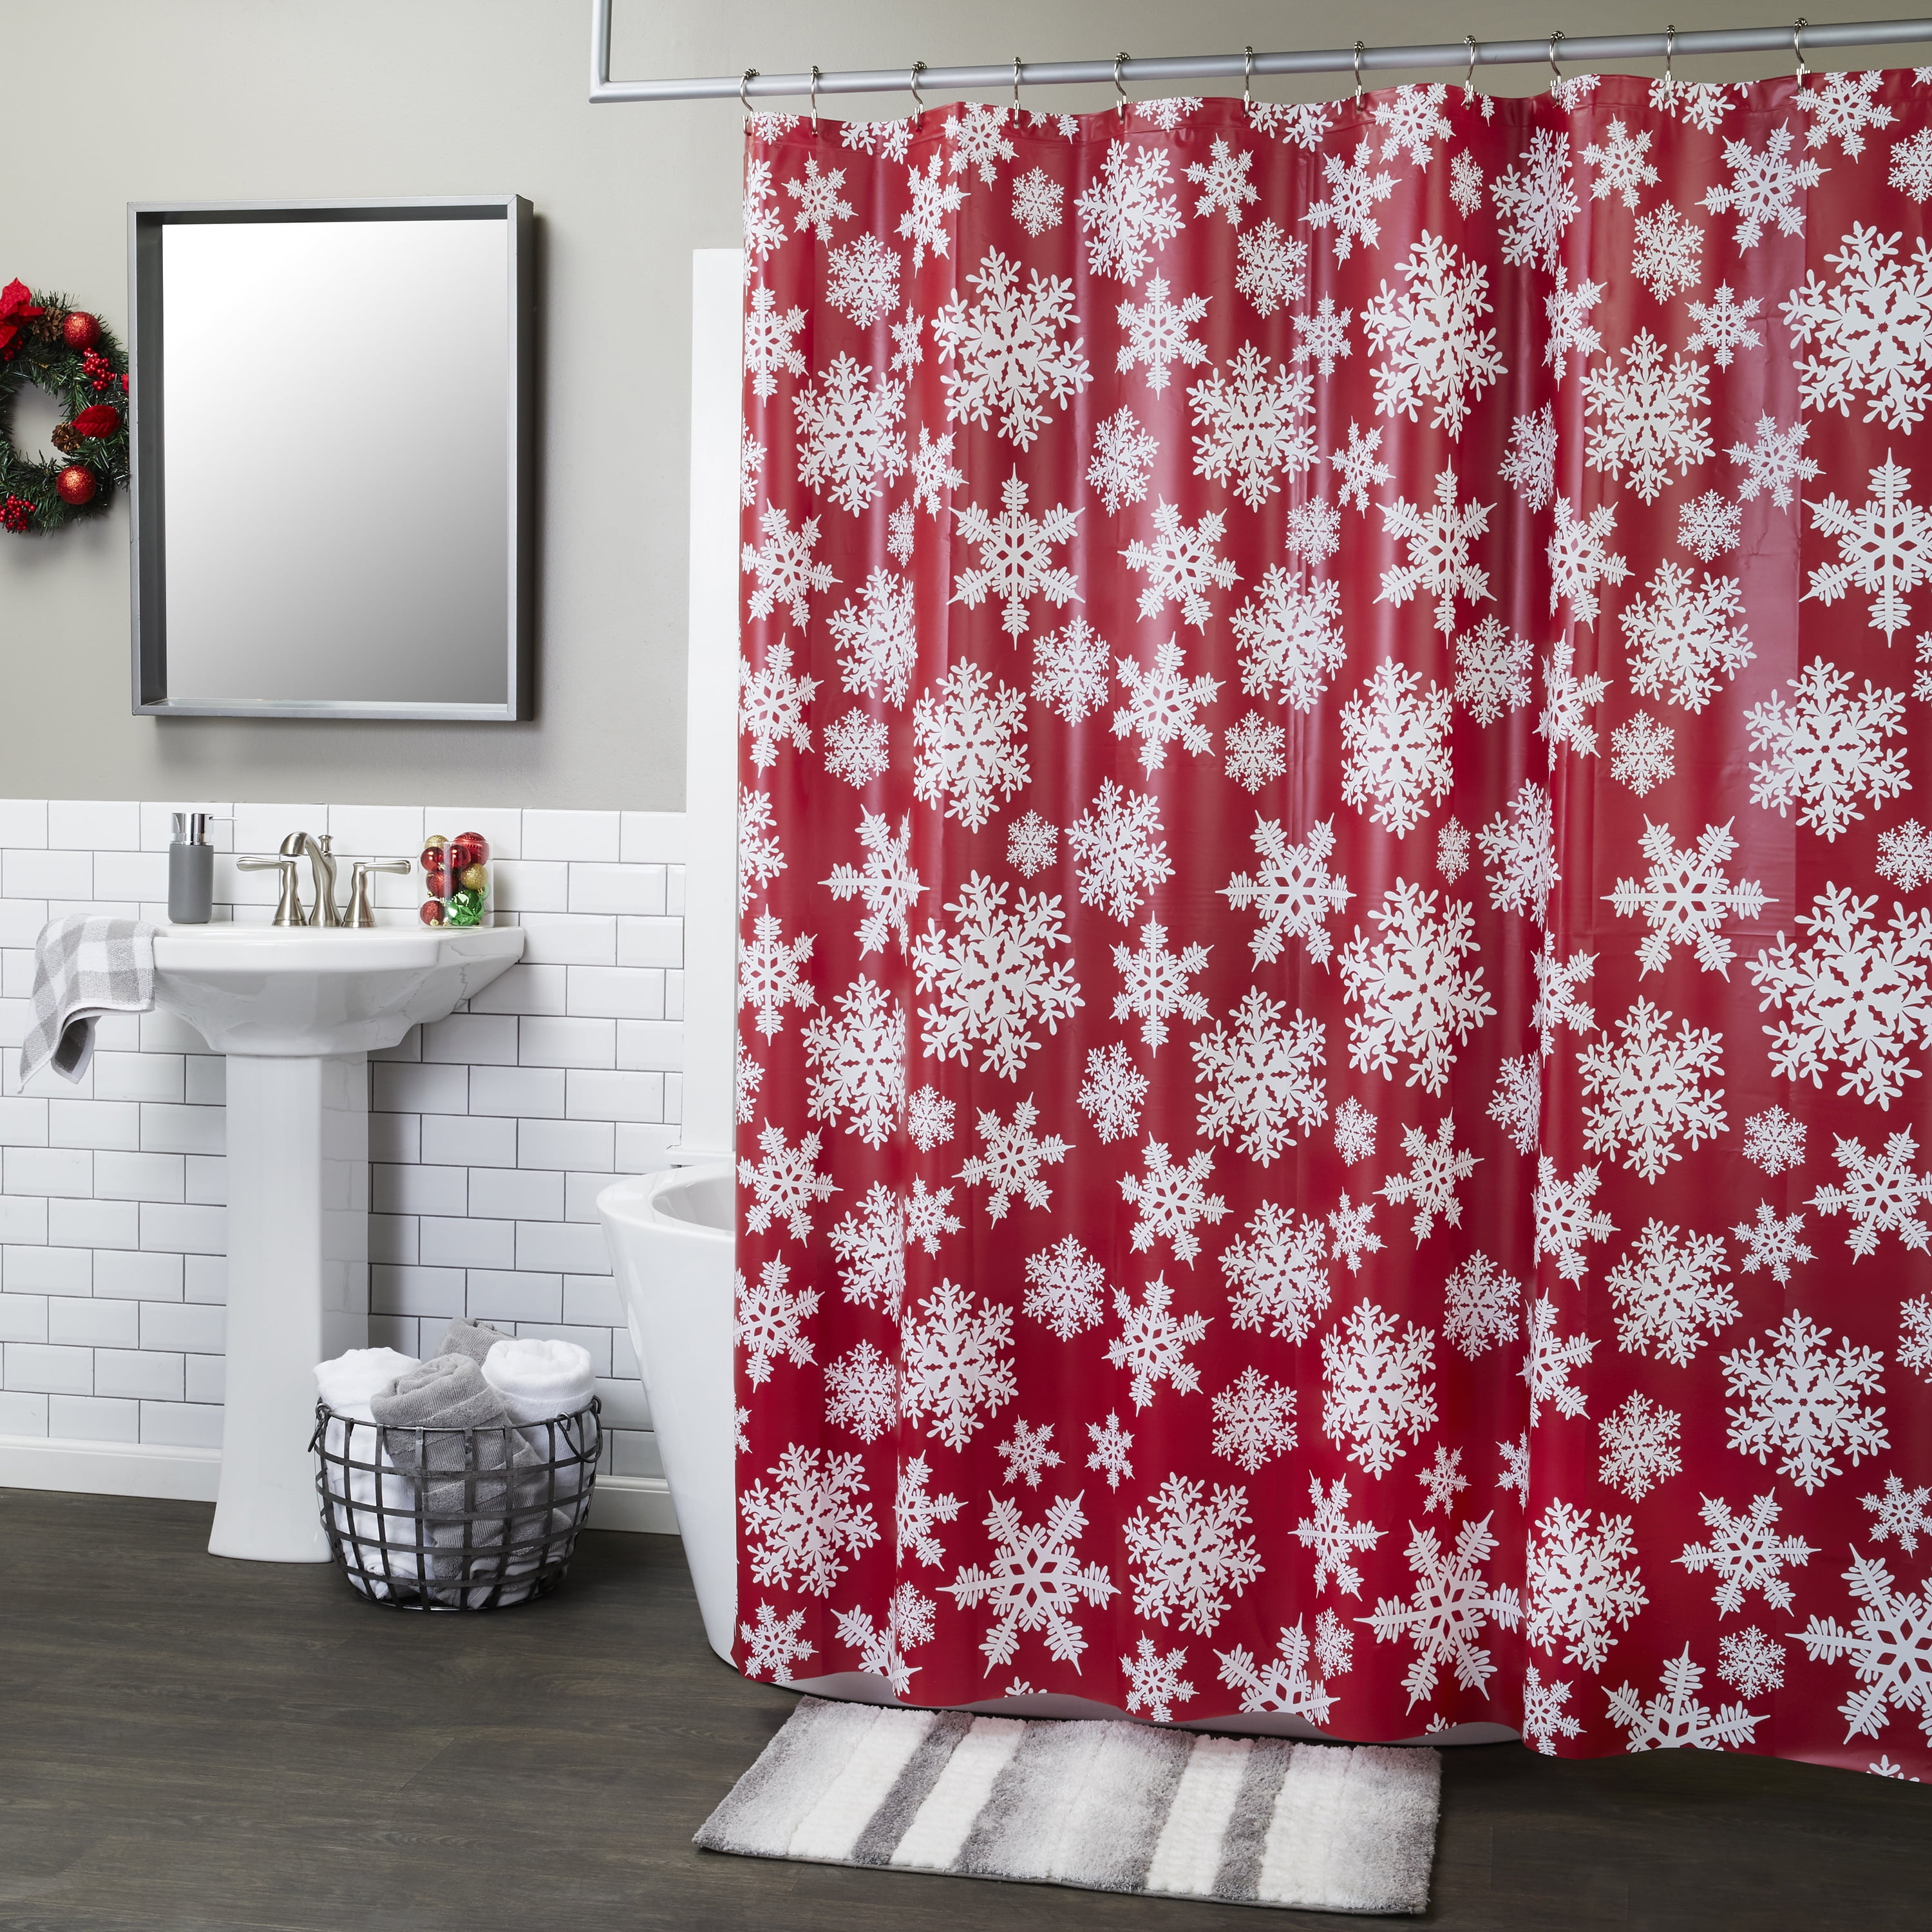 Red Black Gold Hello Gorgeous PEVA Shower Curtain Liner Odorless Eco Friendly 